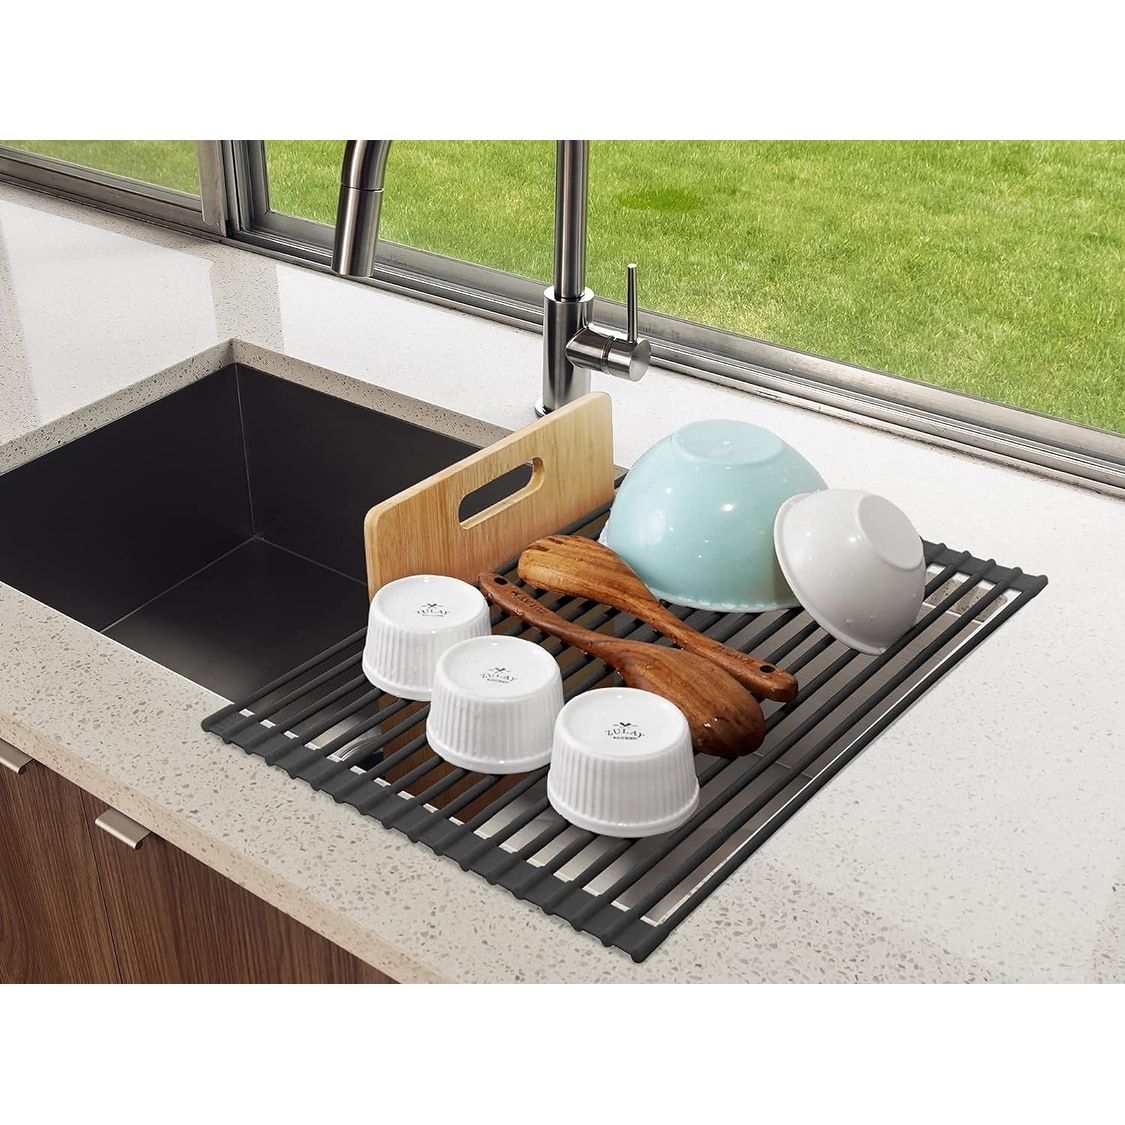 https://ak1.ostkcdn.com/images/products/is/images/direct/ecd7ebb738d9ab4806b7e318295784a12c9cfc02/Zulay-Kitchen-Multipurpose-Roll-Up-Sink-Drying-Rack-%28Large%29.jpg